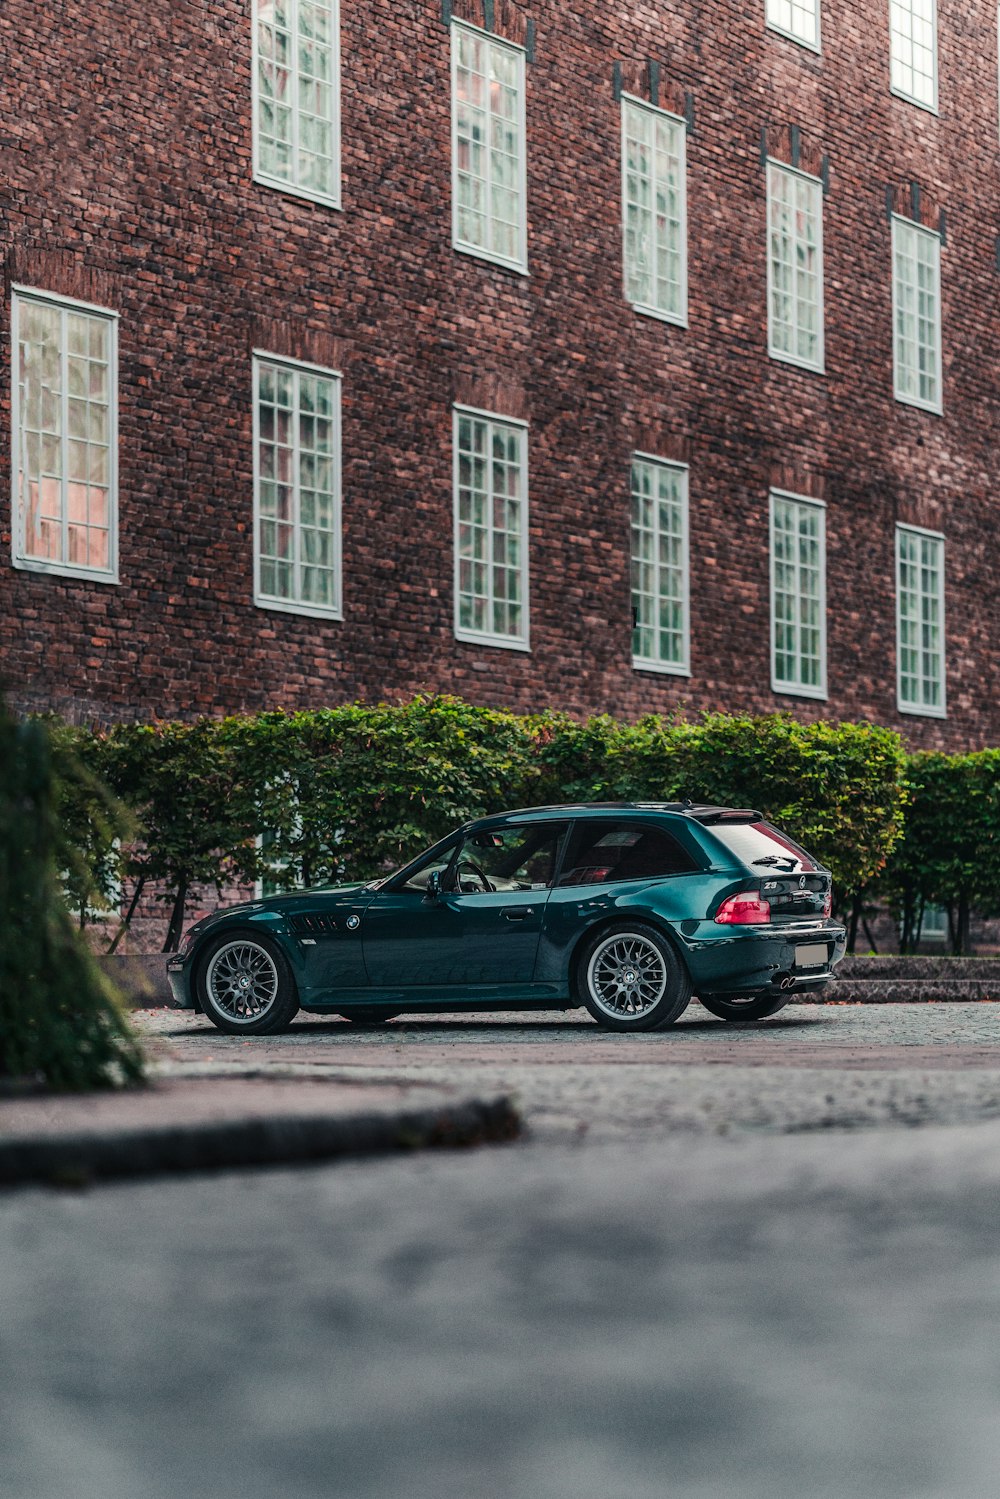 a green car parked in front of a brick building